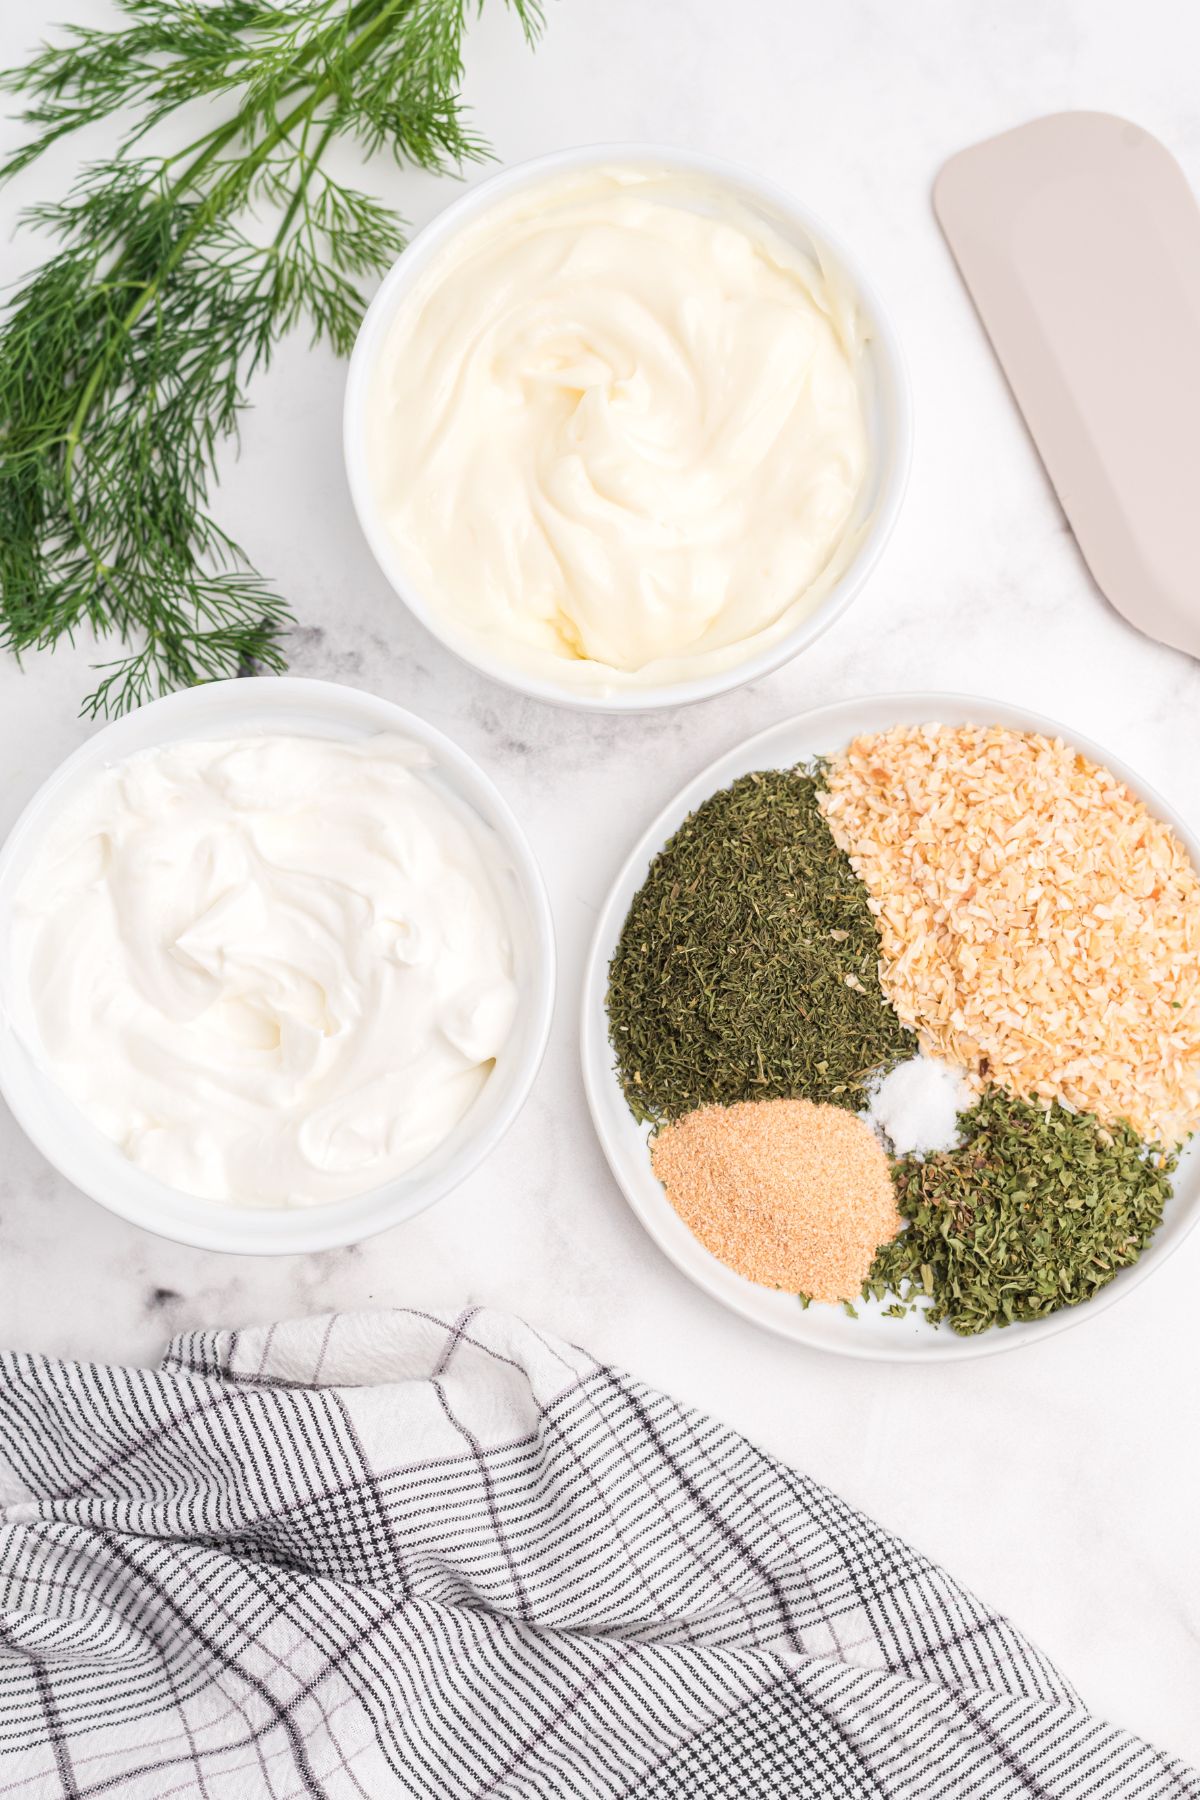 dill dip ingredients on counter with seasonings all one one plate